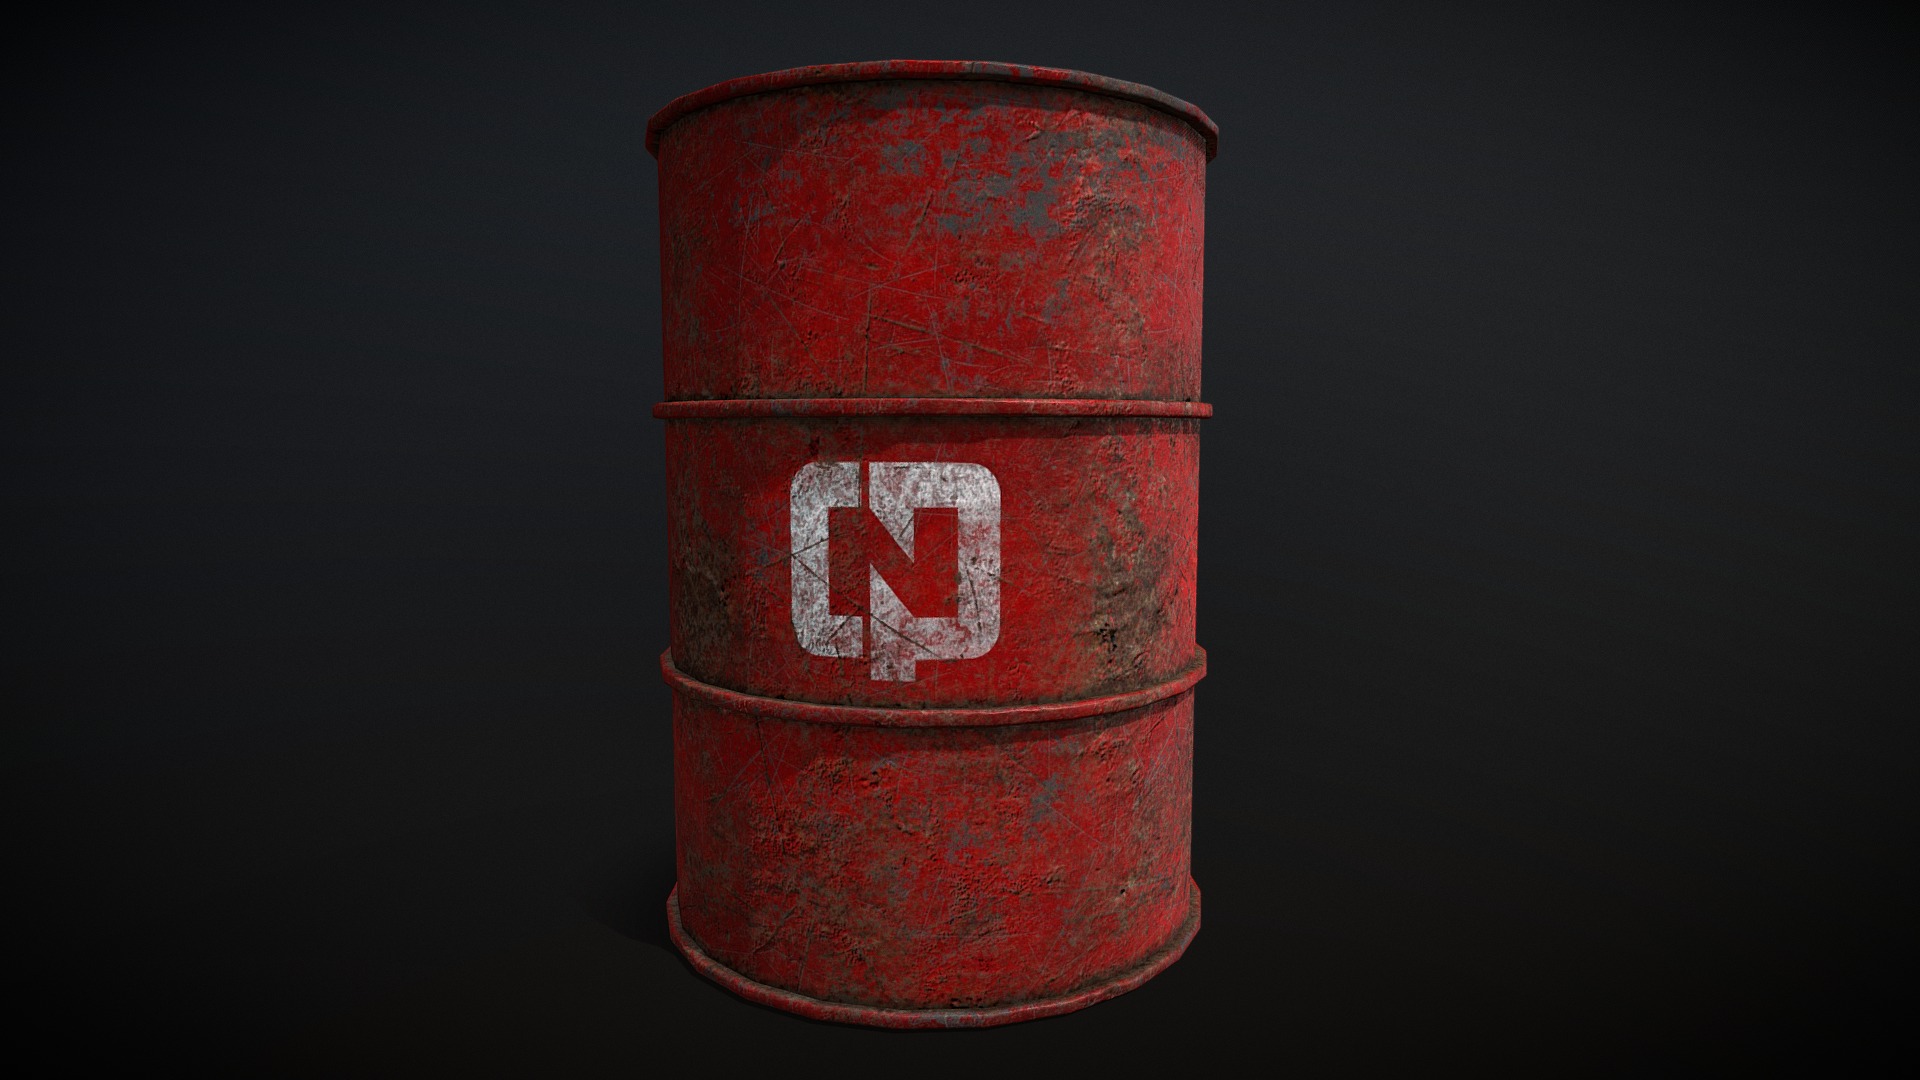 3D model LowPoly CPN Barrel - This is a 3D model of the LowPoly CPN Barrel. The 3D model is about a red can with a white label.